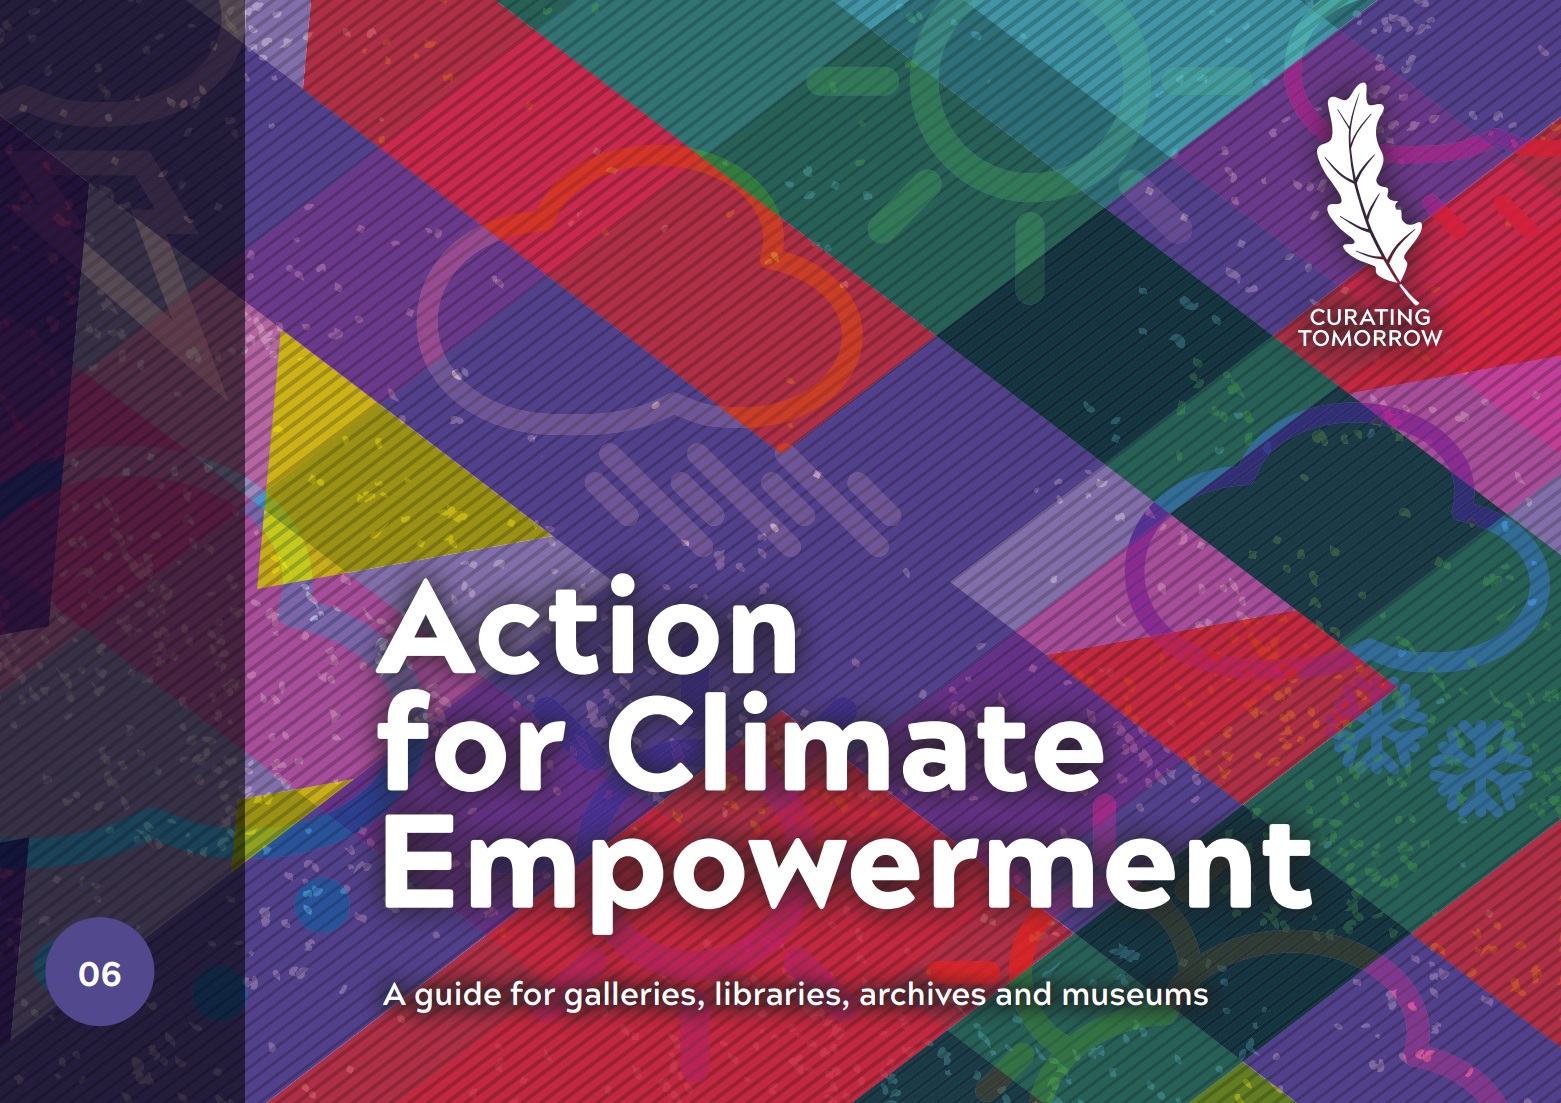  This image is the front page of the Action for Climate Empowerment Guide. The white lettering is set against a mainly purple, green and red, checked background. 